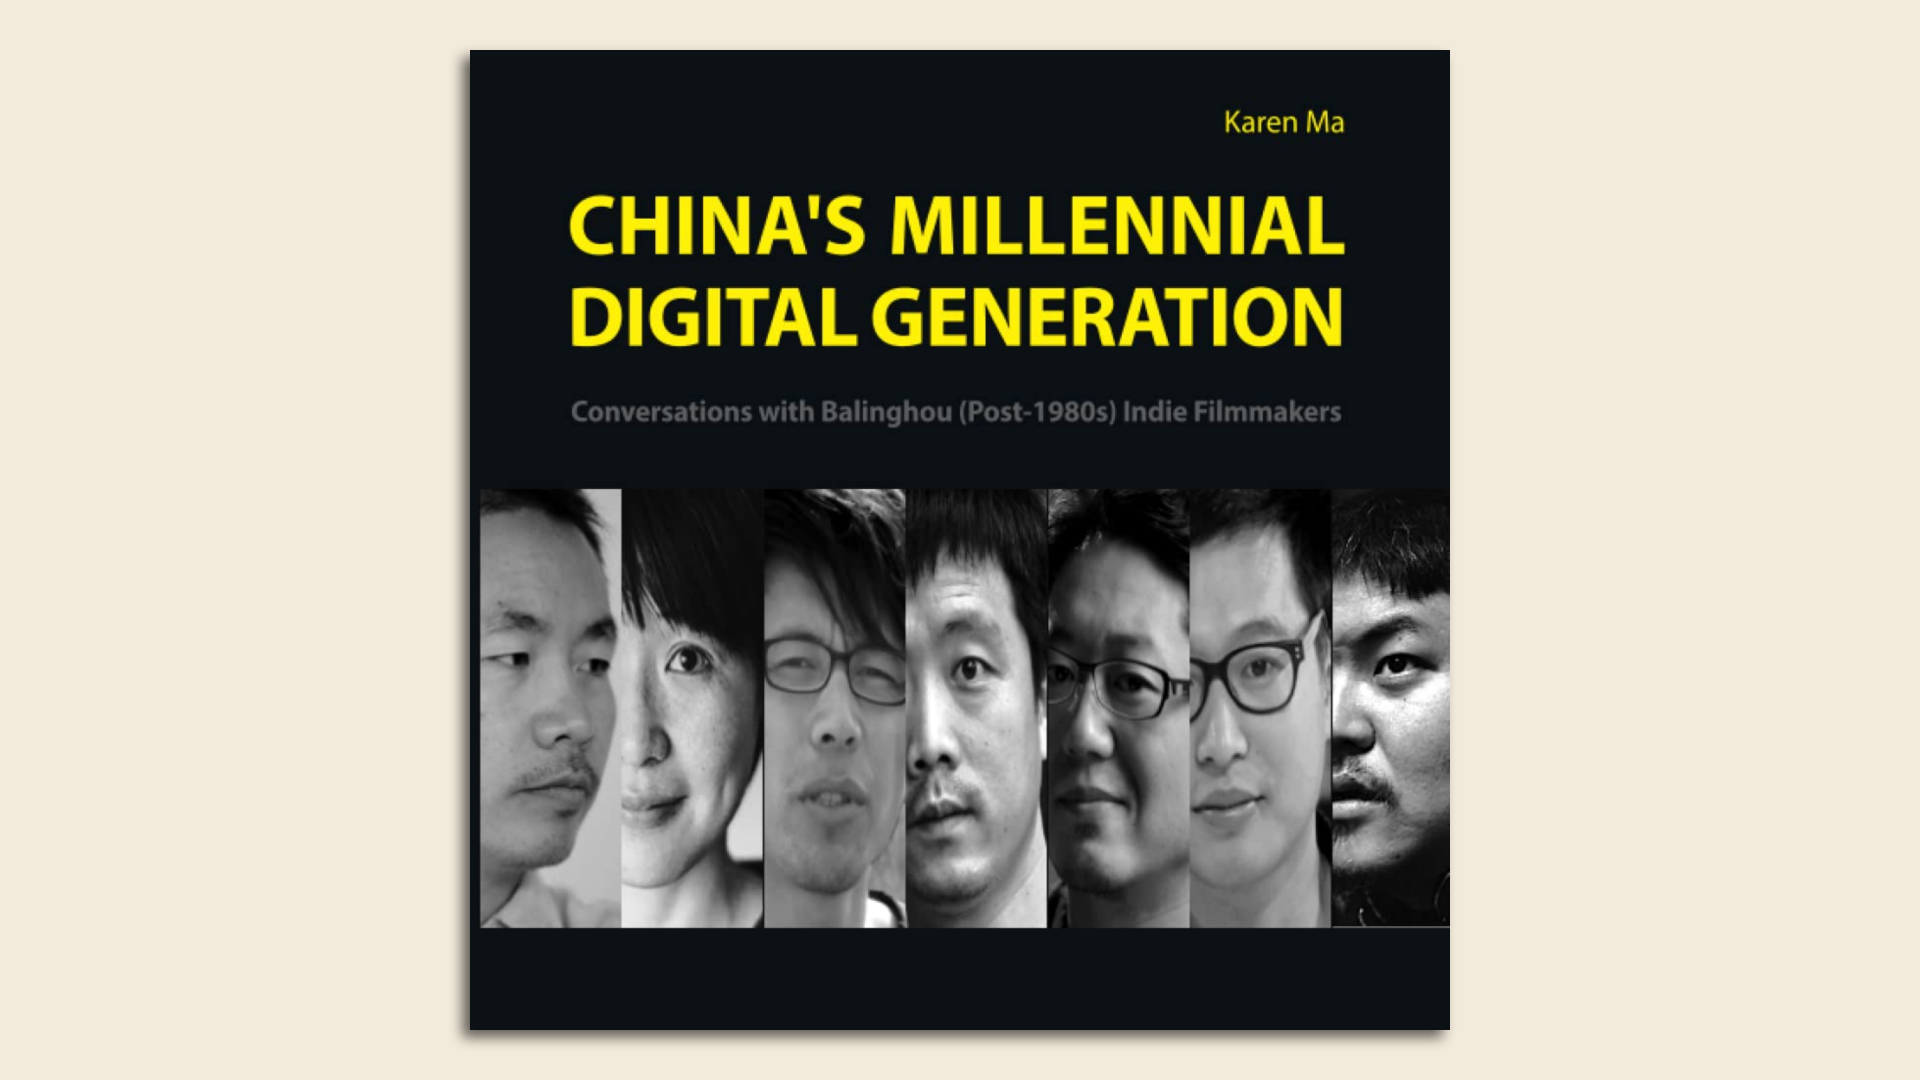 Book image cover of "China's Millennial Digital Generation" by Karen Ma